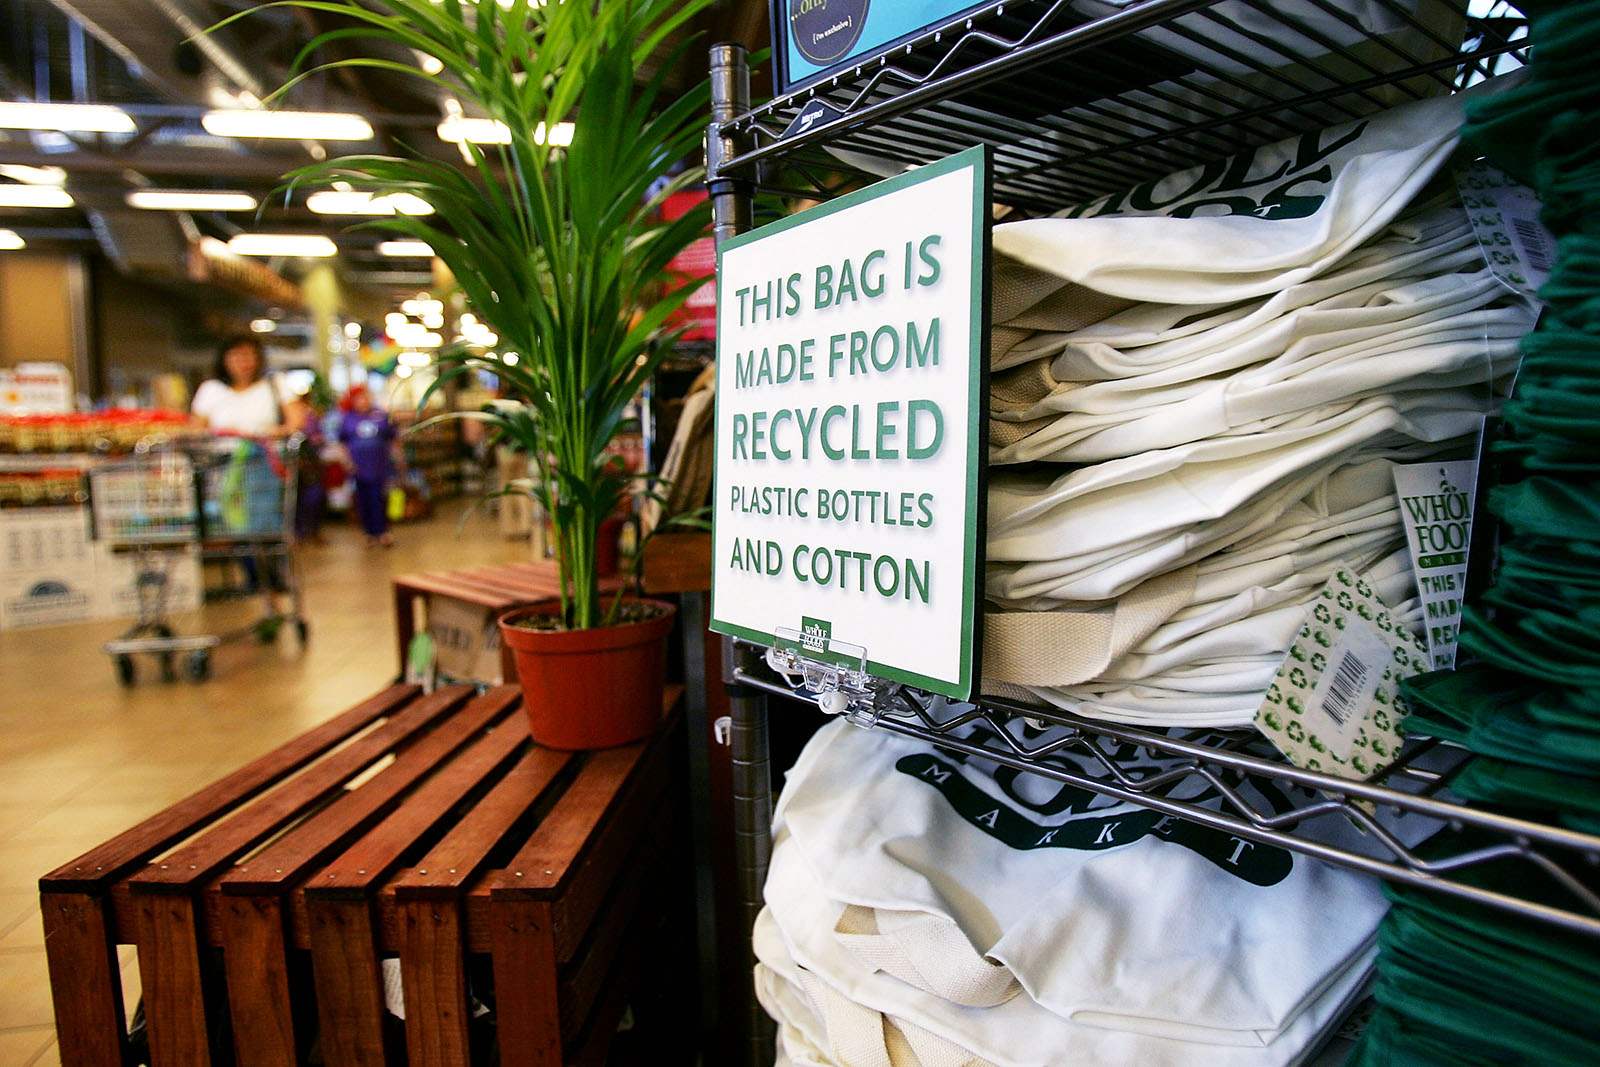 Plastic bags feel integral to modern life. But they're a